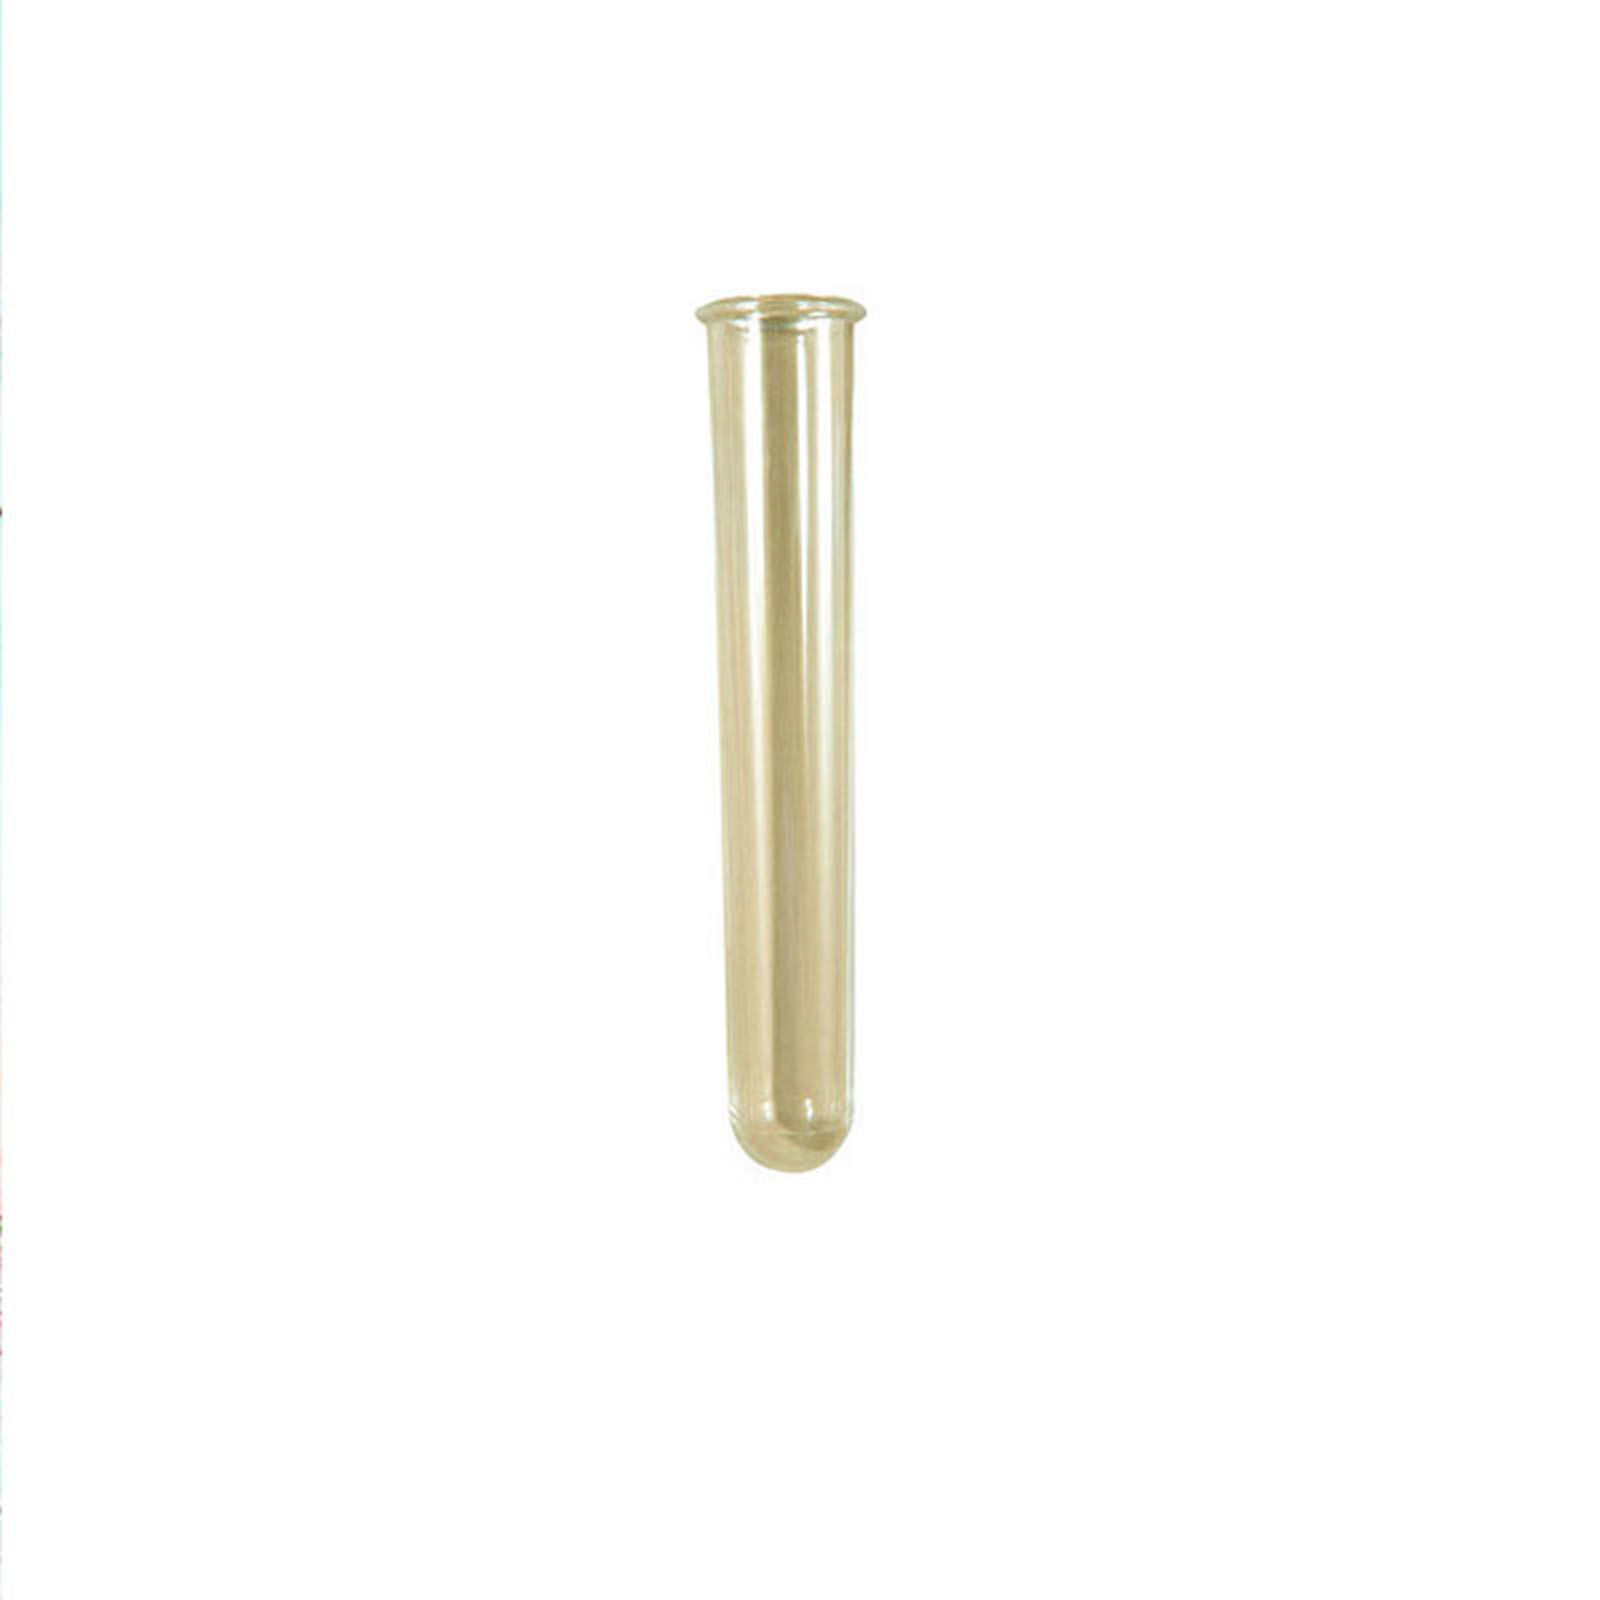 Picture of Silicone Resin Mold For Jewelry Making Test Tube Hydroponic Flower Pot Cylinder Amber 12cm x 1 Piece